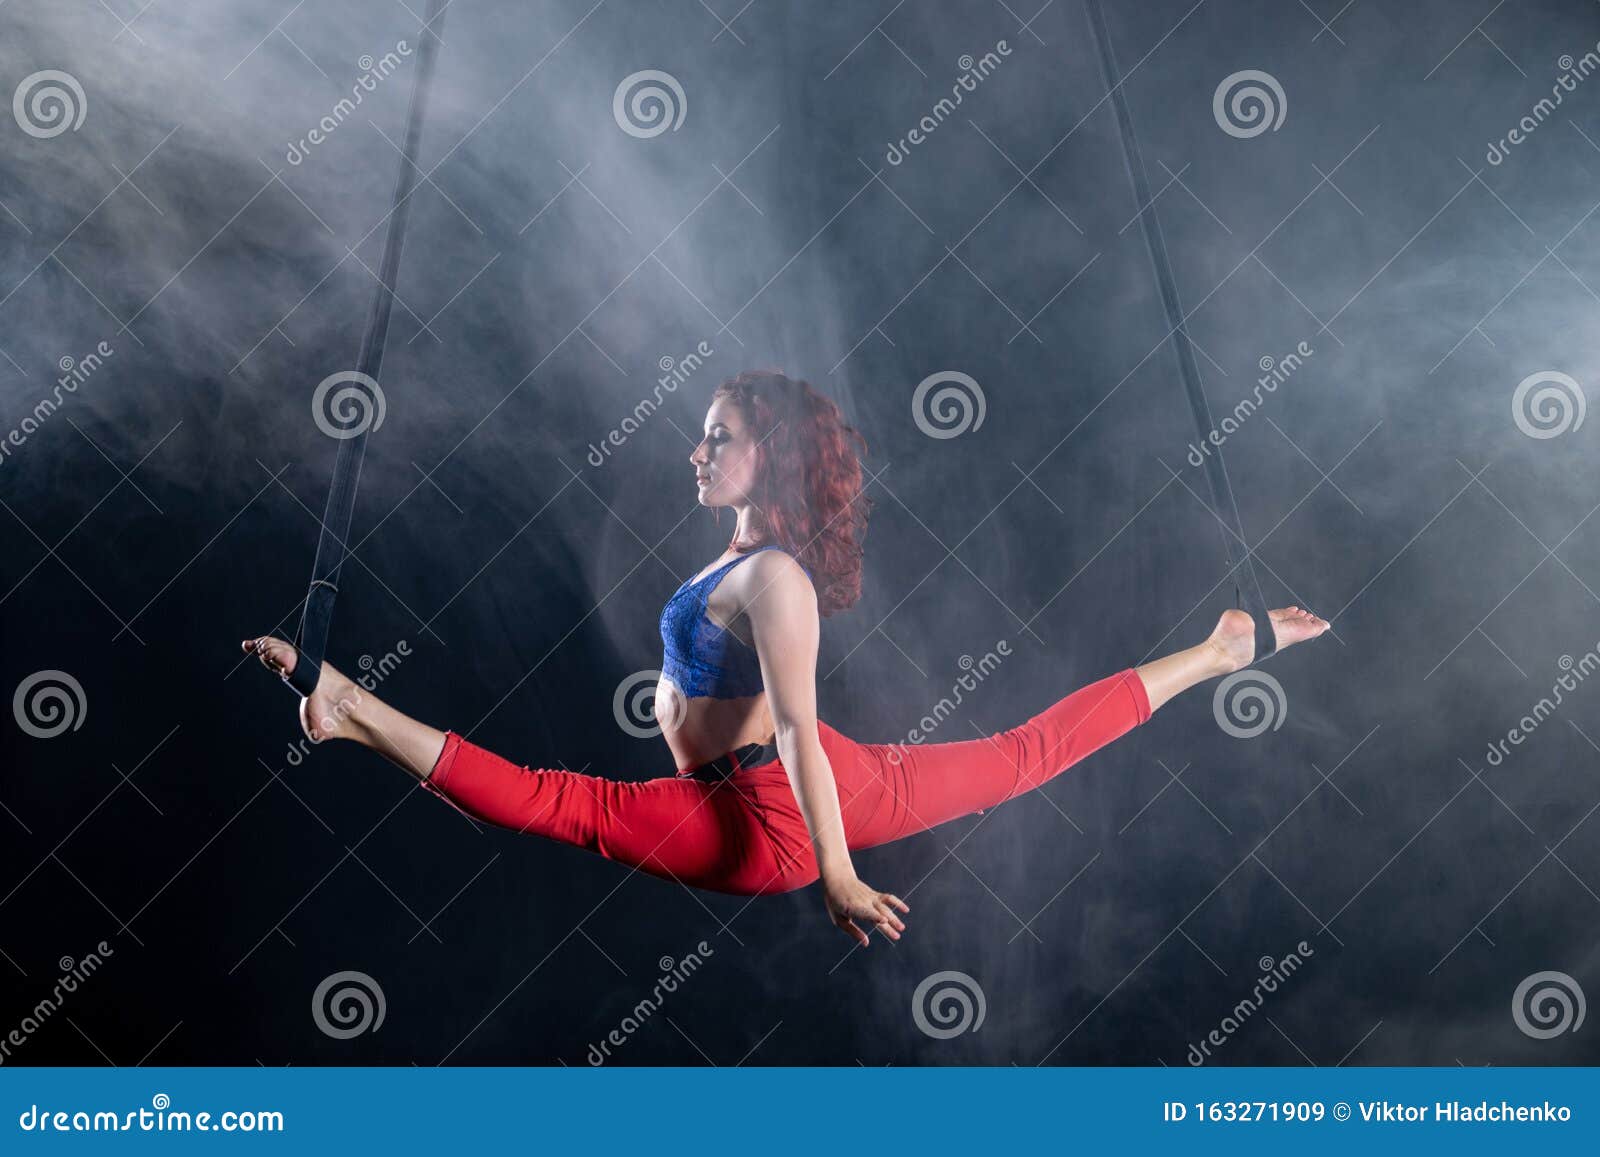 Female Athletic And Flexible Aerial Circus Artist With Redhead On Aerial Straps On Black